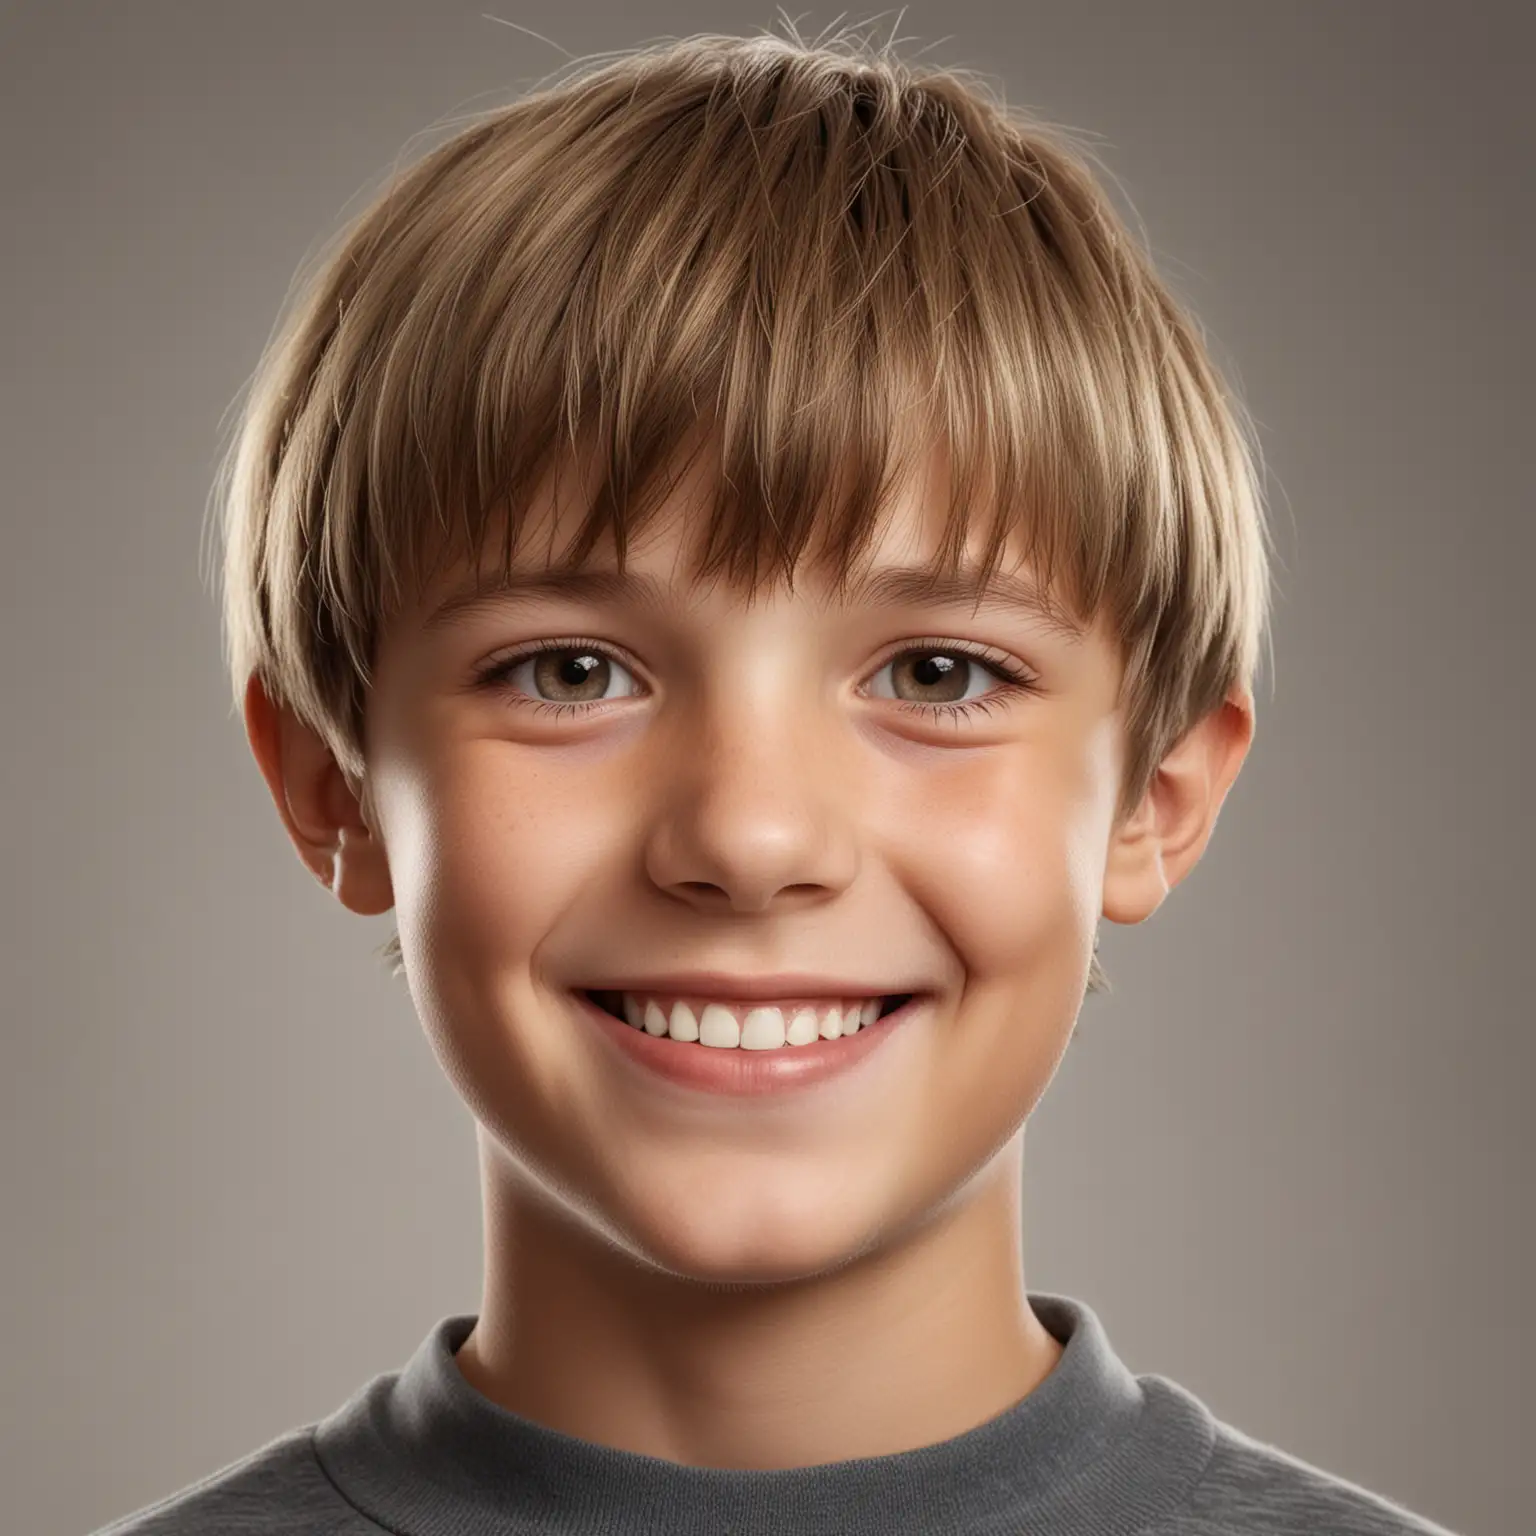 Hyper realistic photo of Happy thirteen year old boy with soft, shiny  hair,  neatly combed  bowl cut,  light overhead,  headshot, side of face turned toward camera